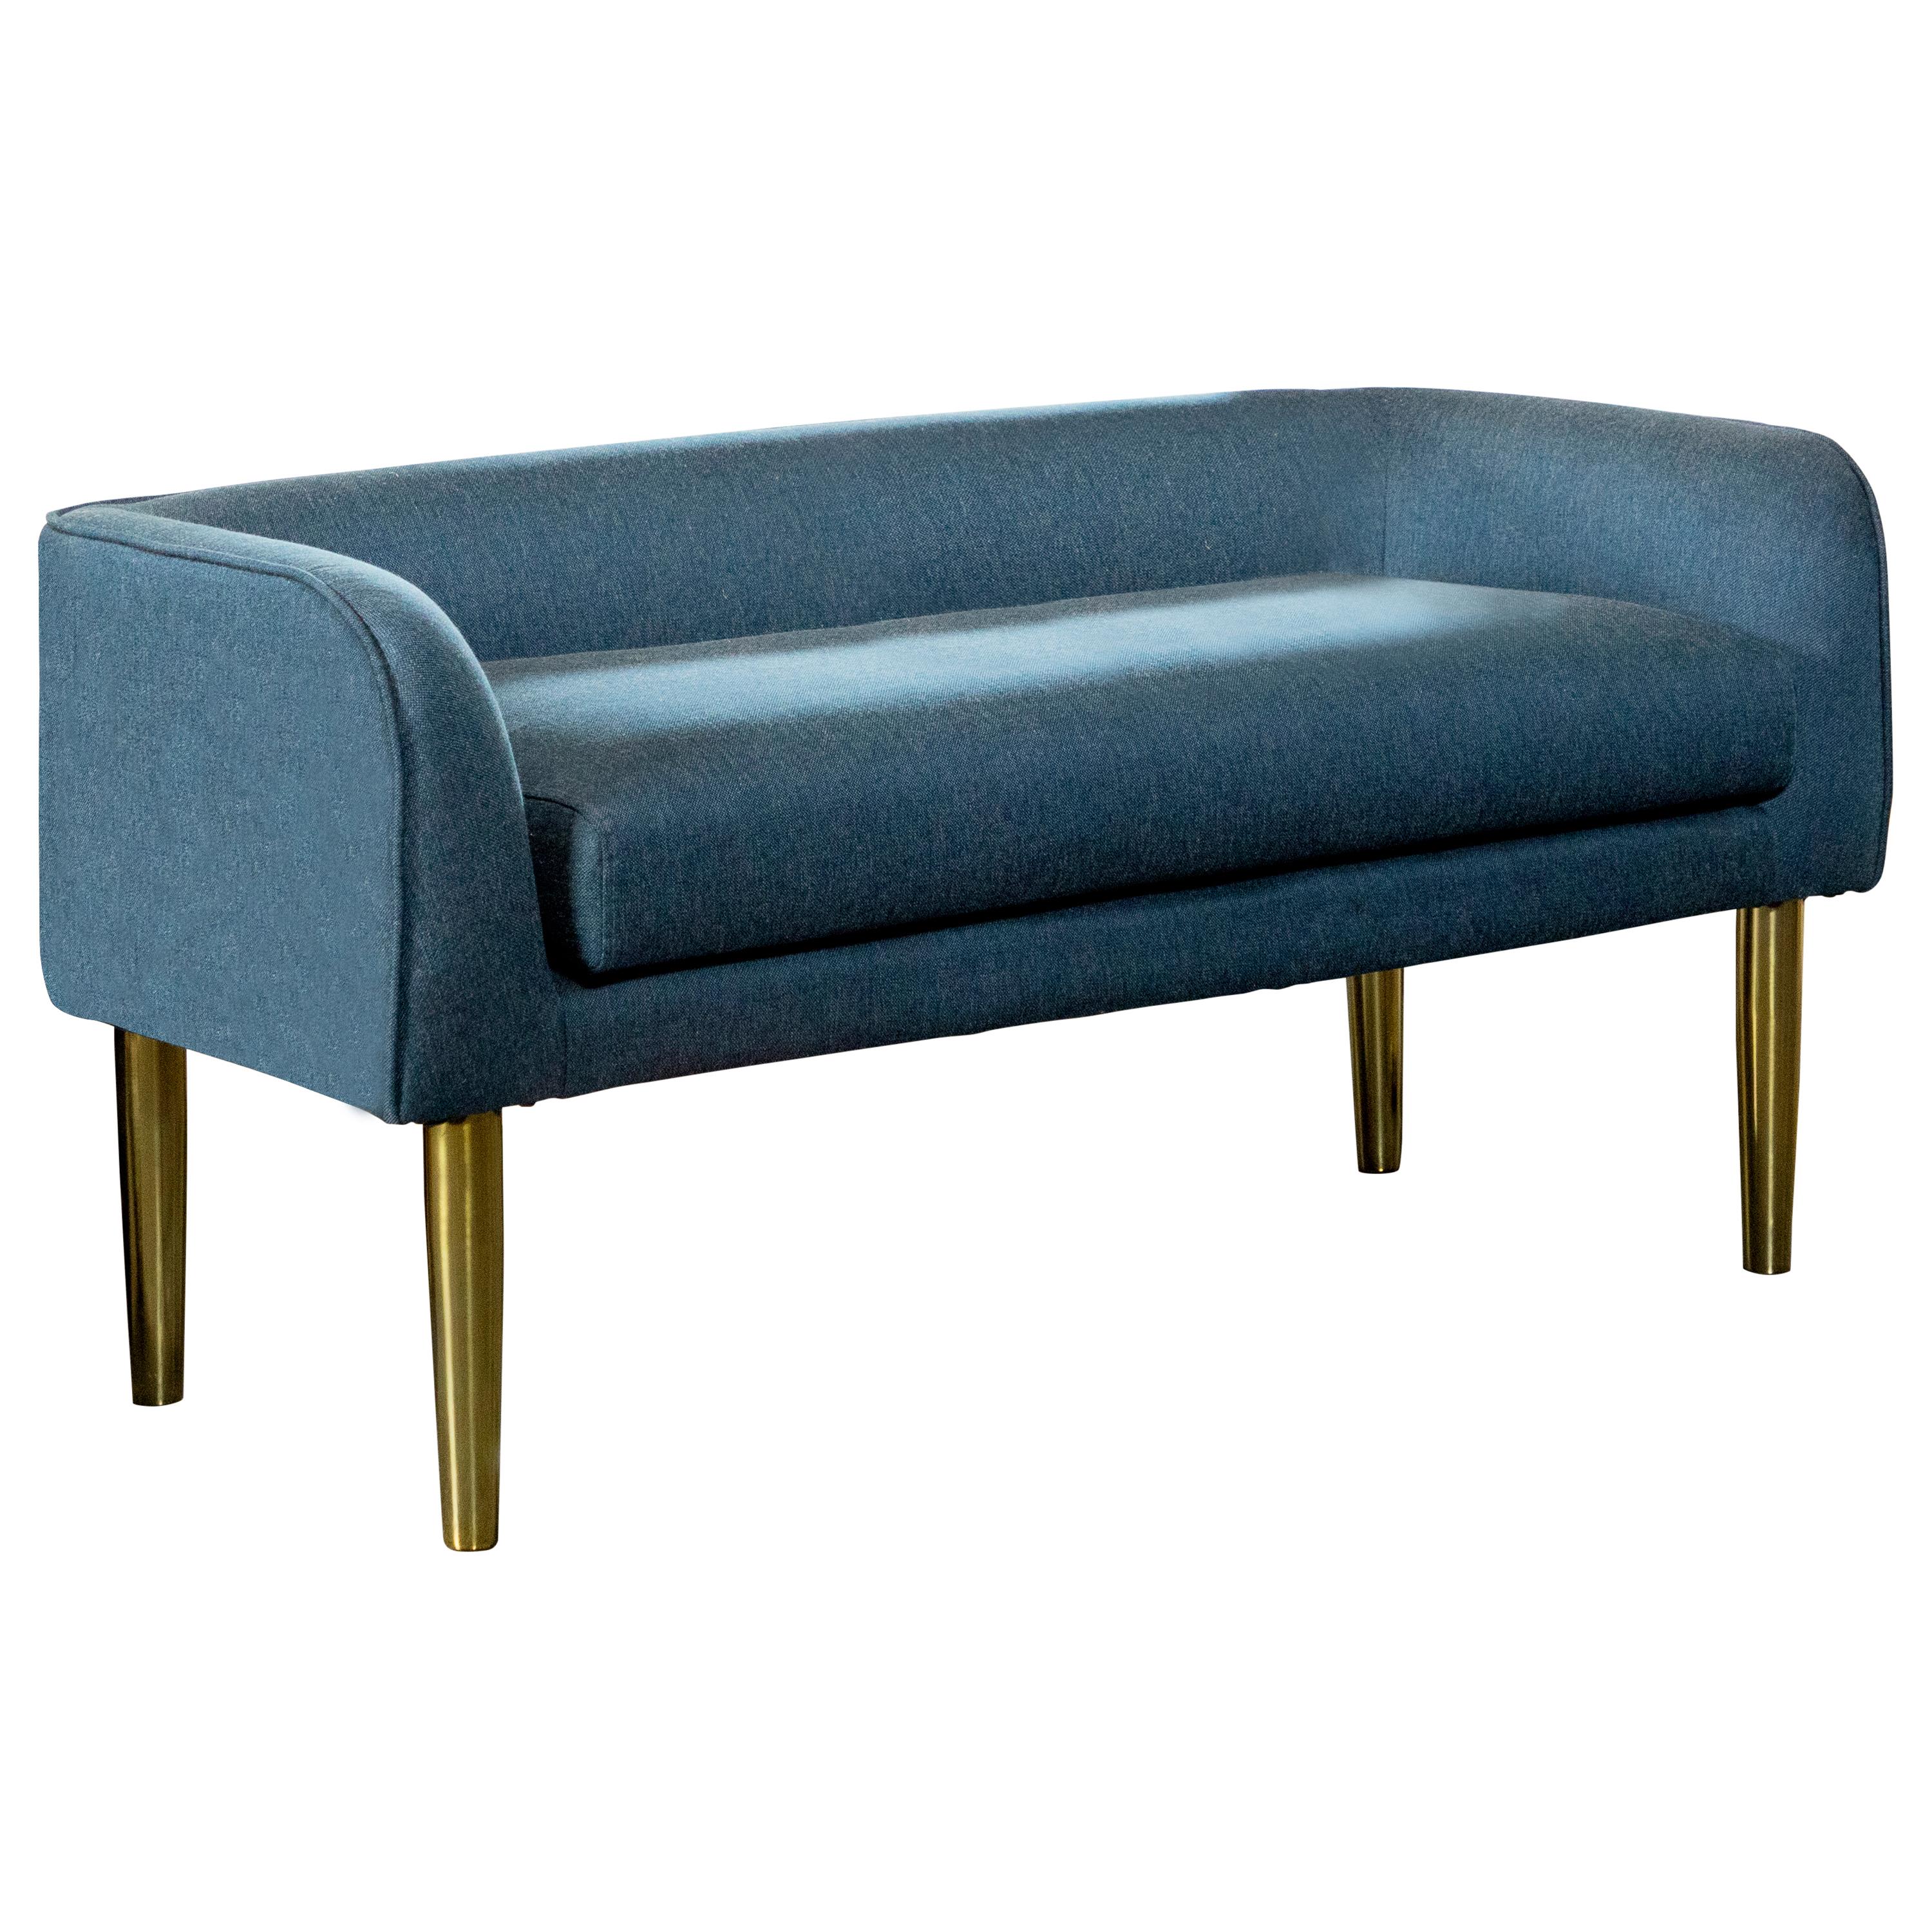 Transitional Bench 905688 905688 in Blue 